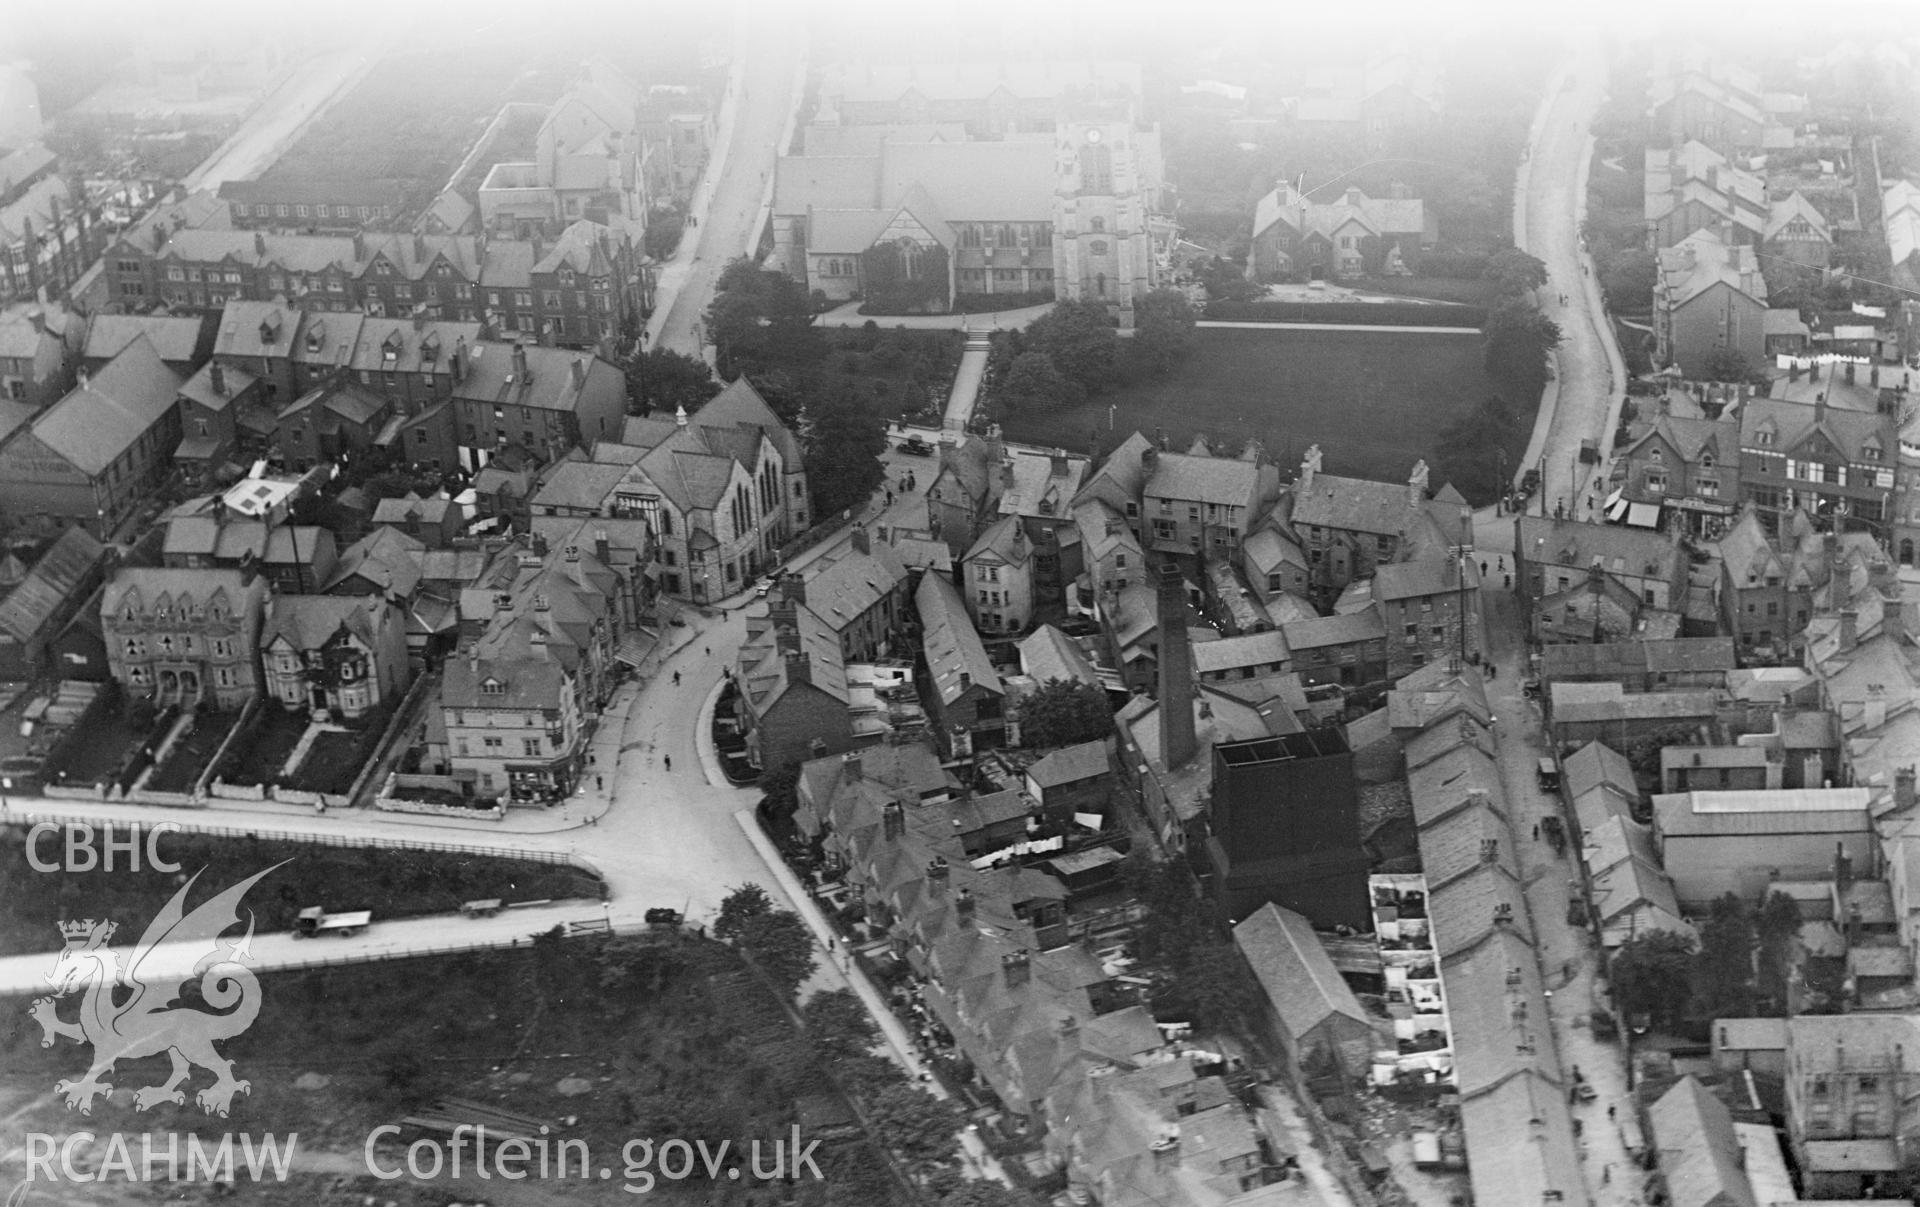 View of Colwyn Bay showing part of town including St Paul's church, oblique aerial view. 5?x4? black and white glass plate negative.